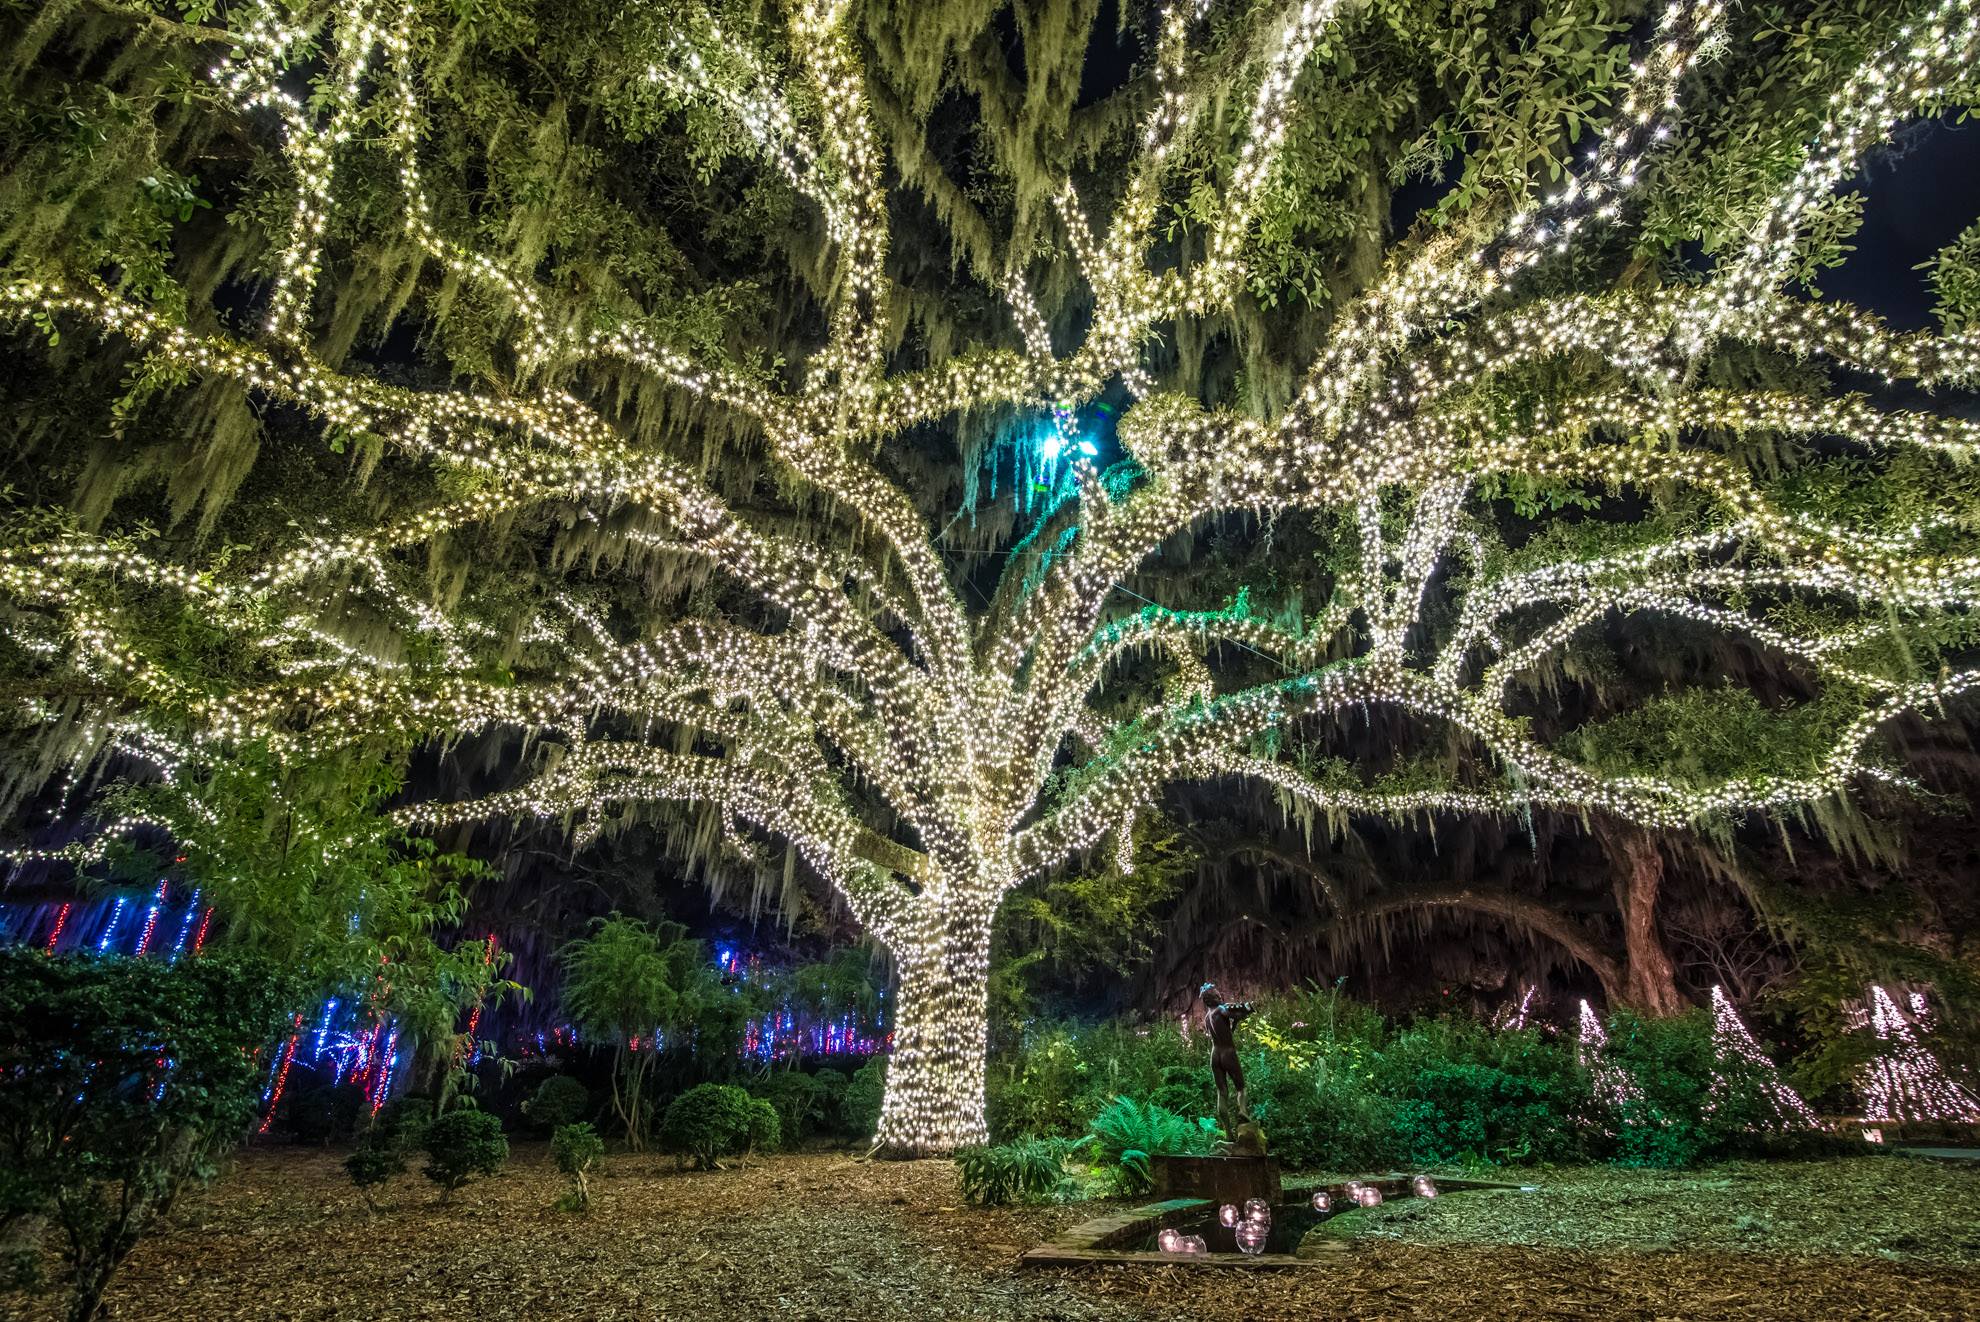 The Holiday Walk At Brookgreen Gardens In South Carolina Is Positively